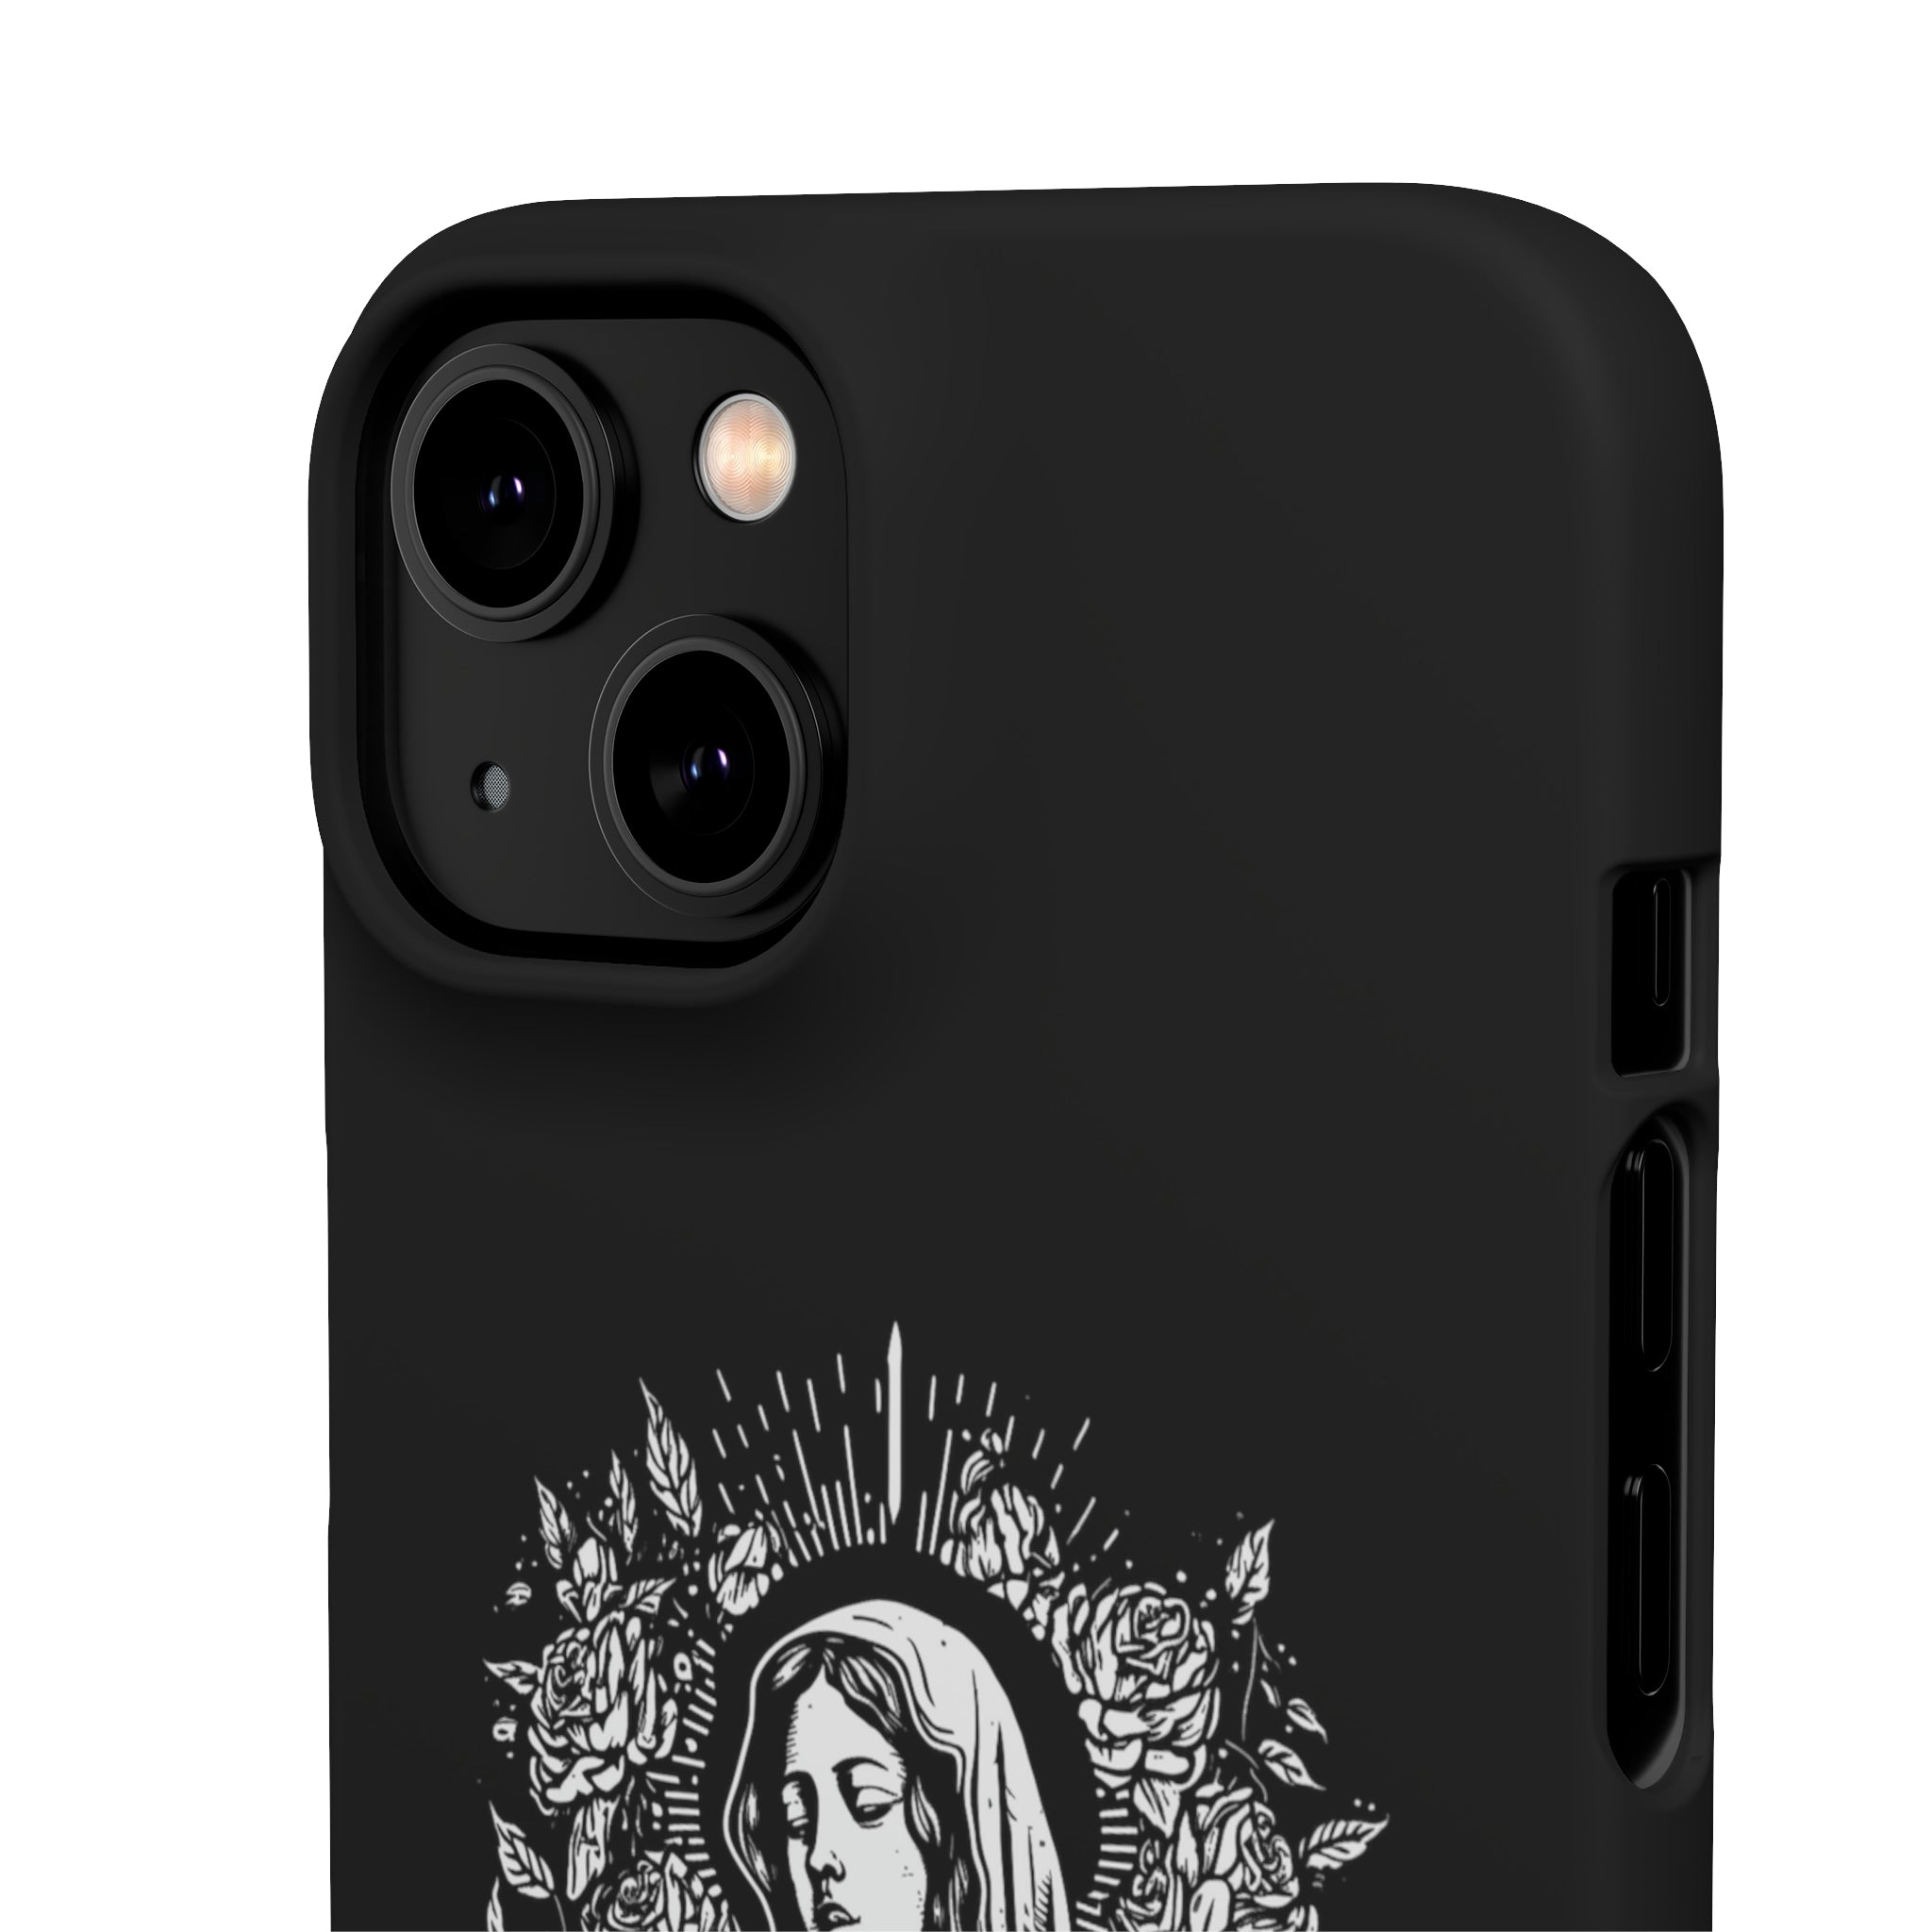 Mary Mother of God Phone Cases